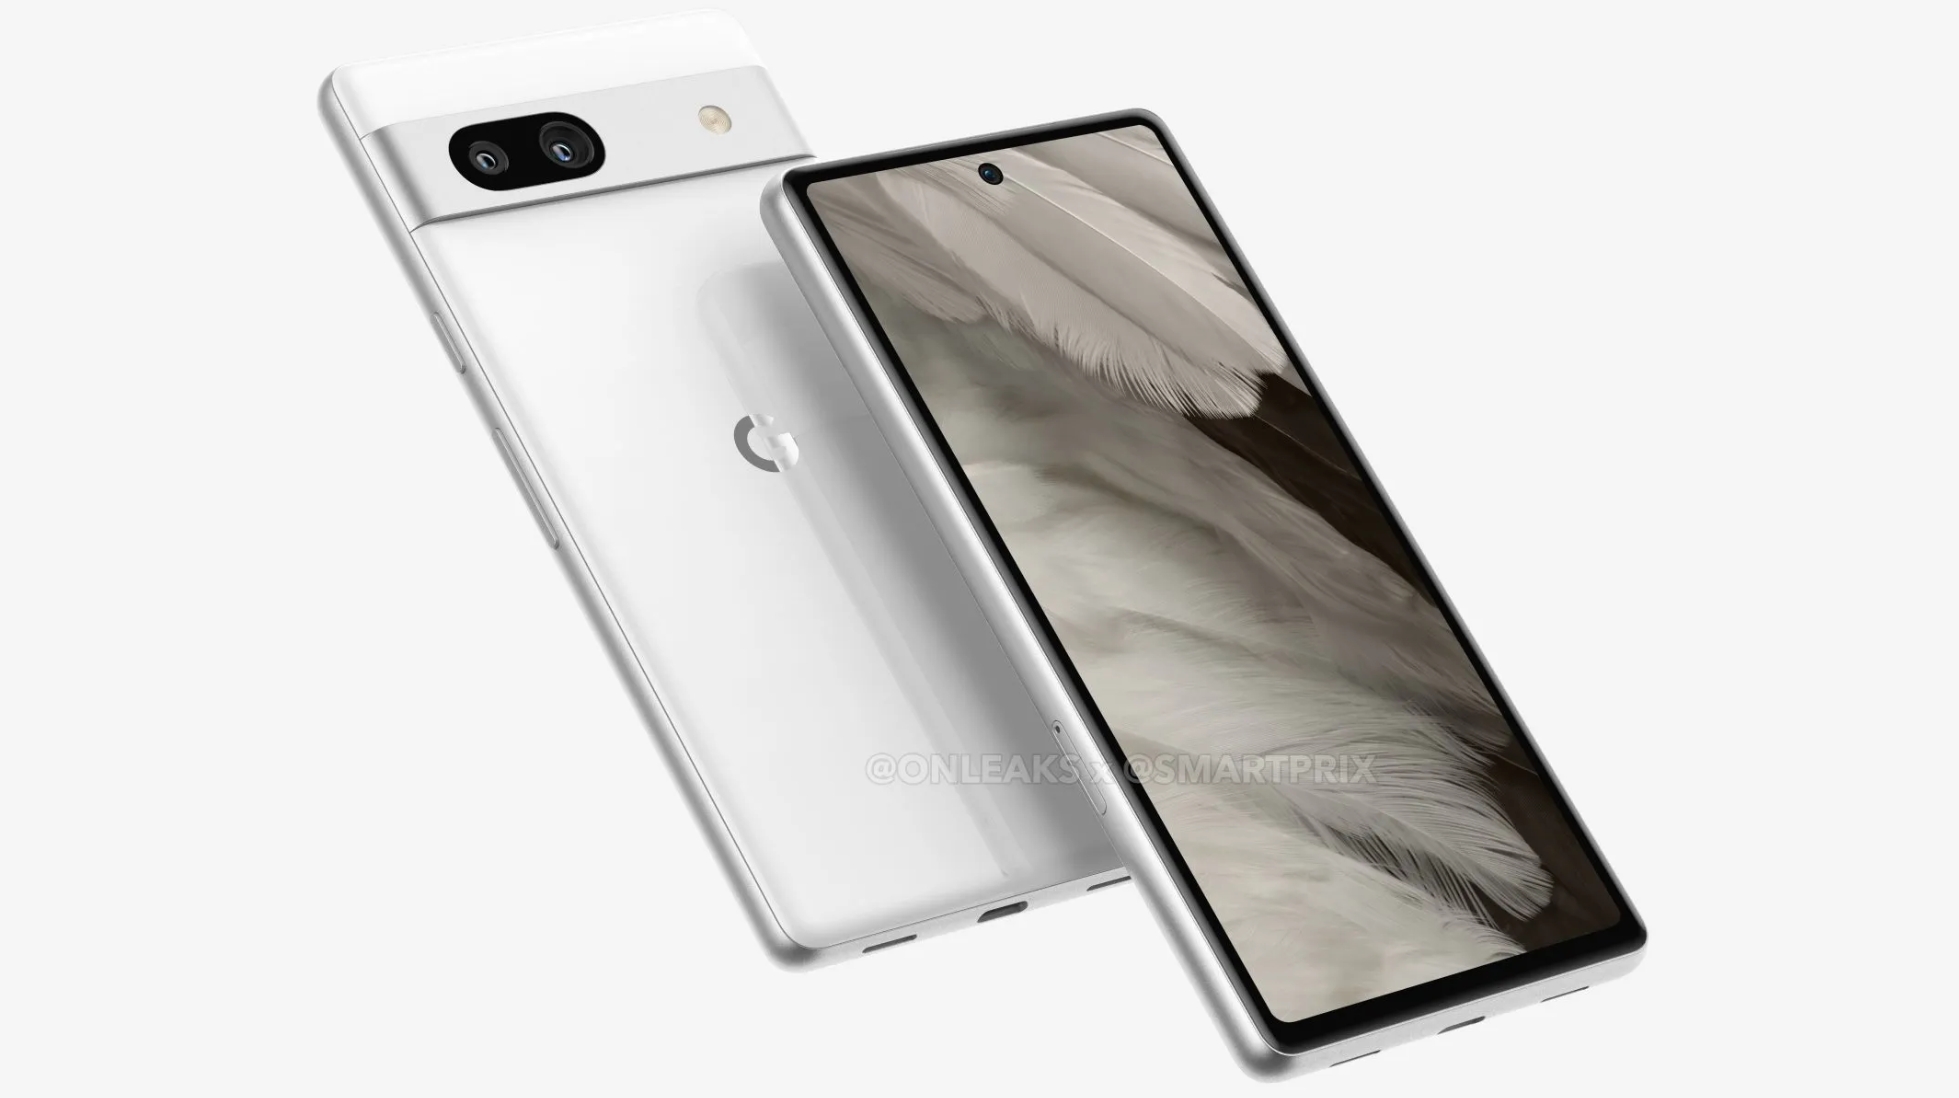 Unofficial renders of the Pixel 7a